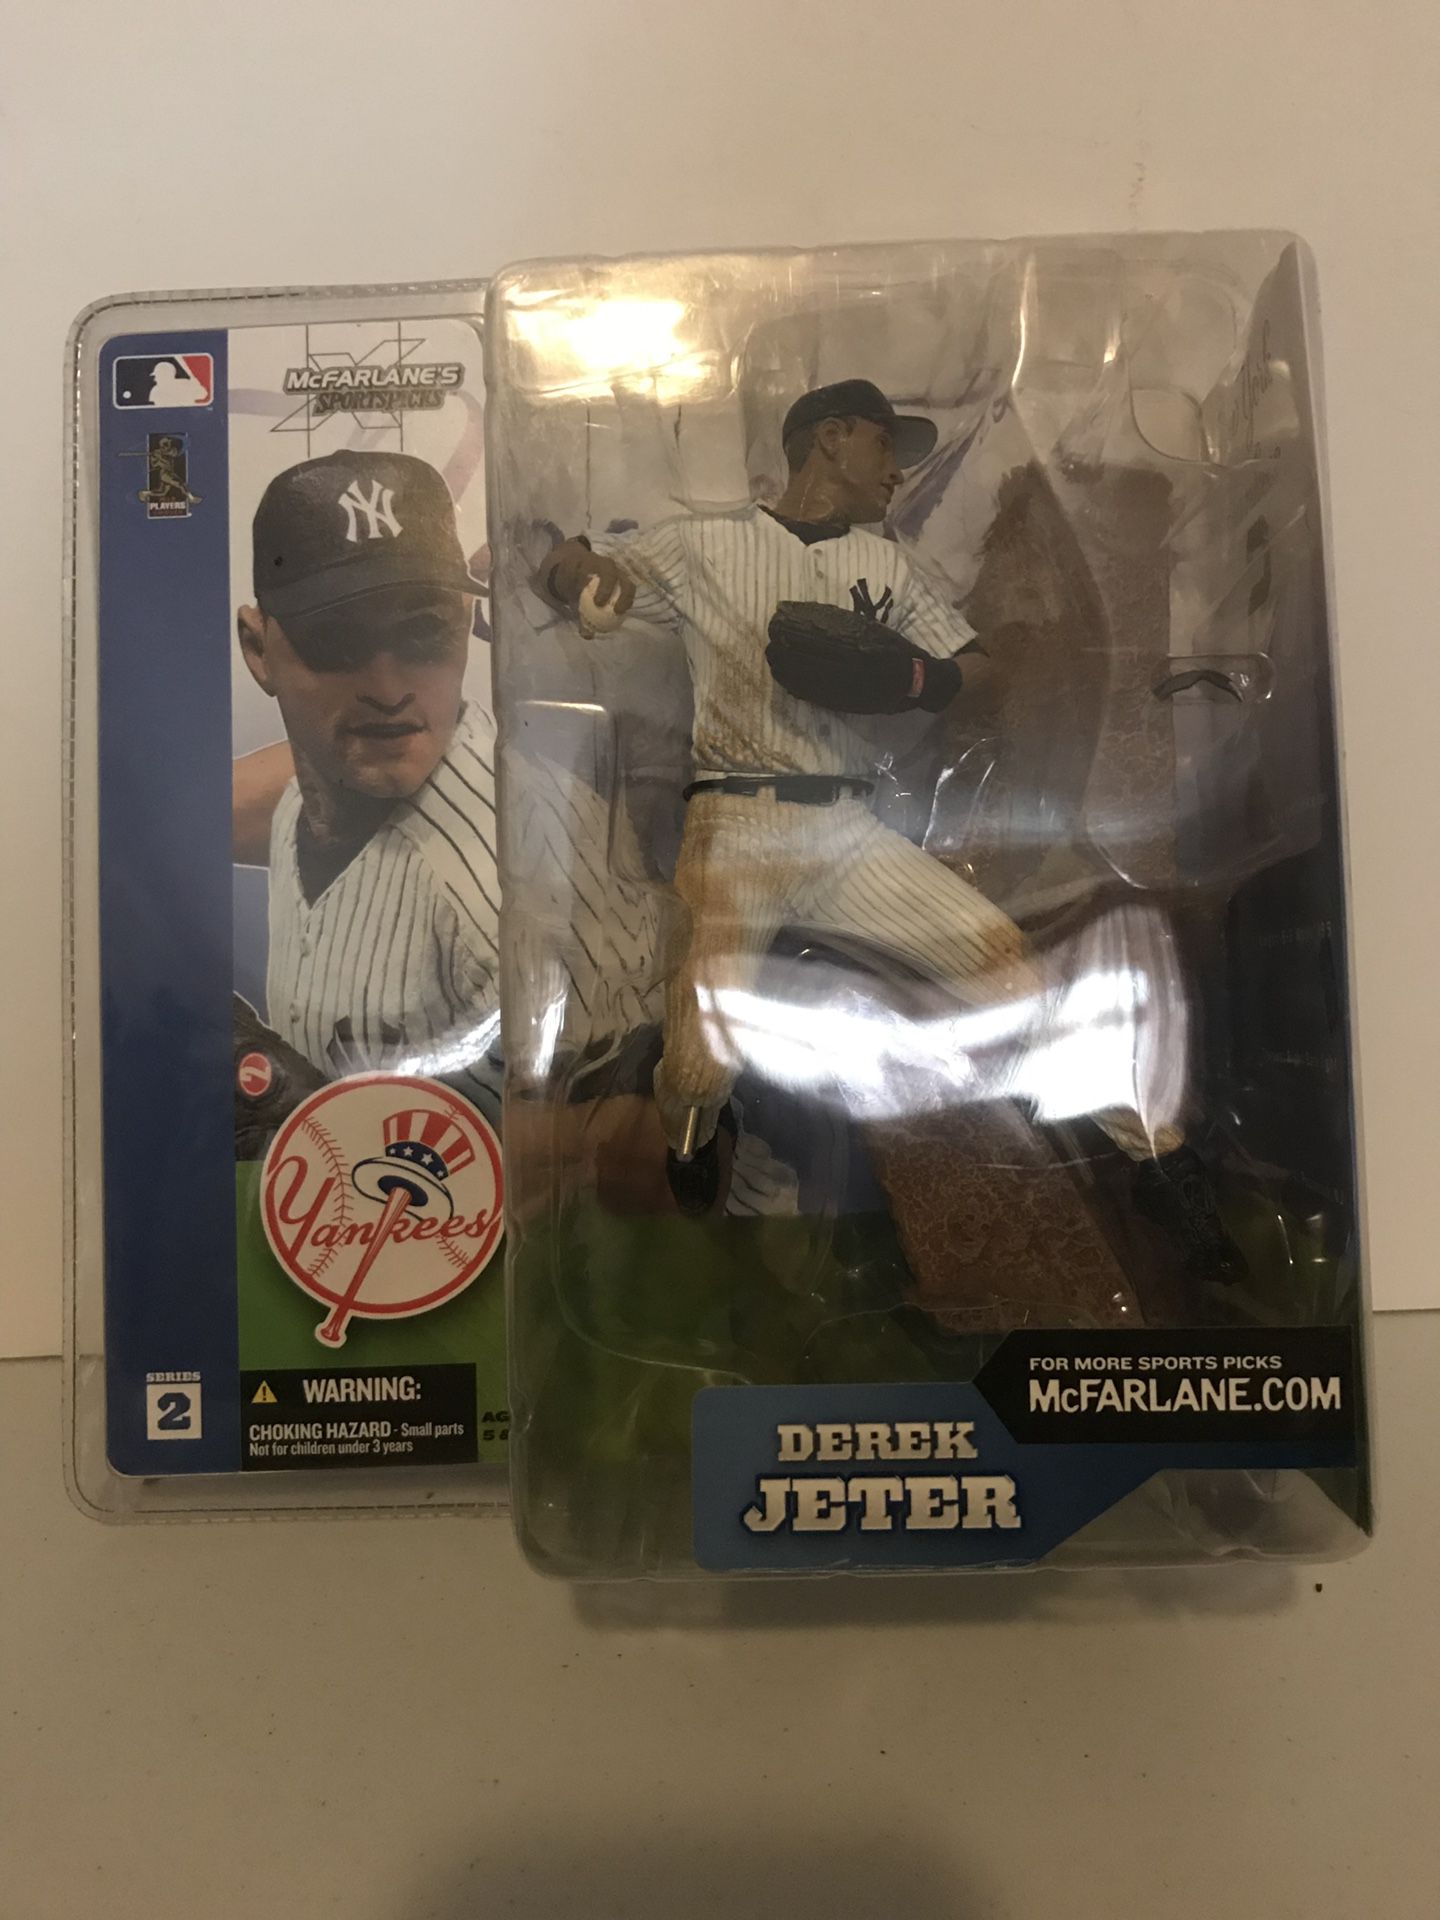 VINTAGE DEREK JETER ACTION FIGURE! COLLECTIBLE! PRICED TO SELL!